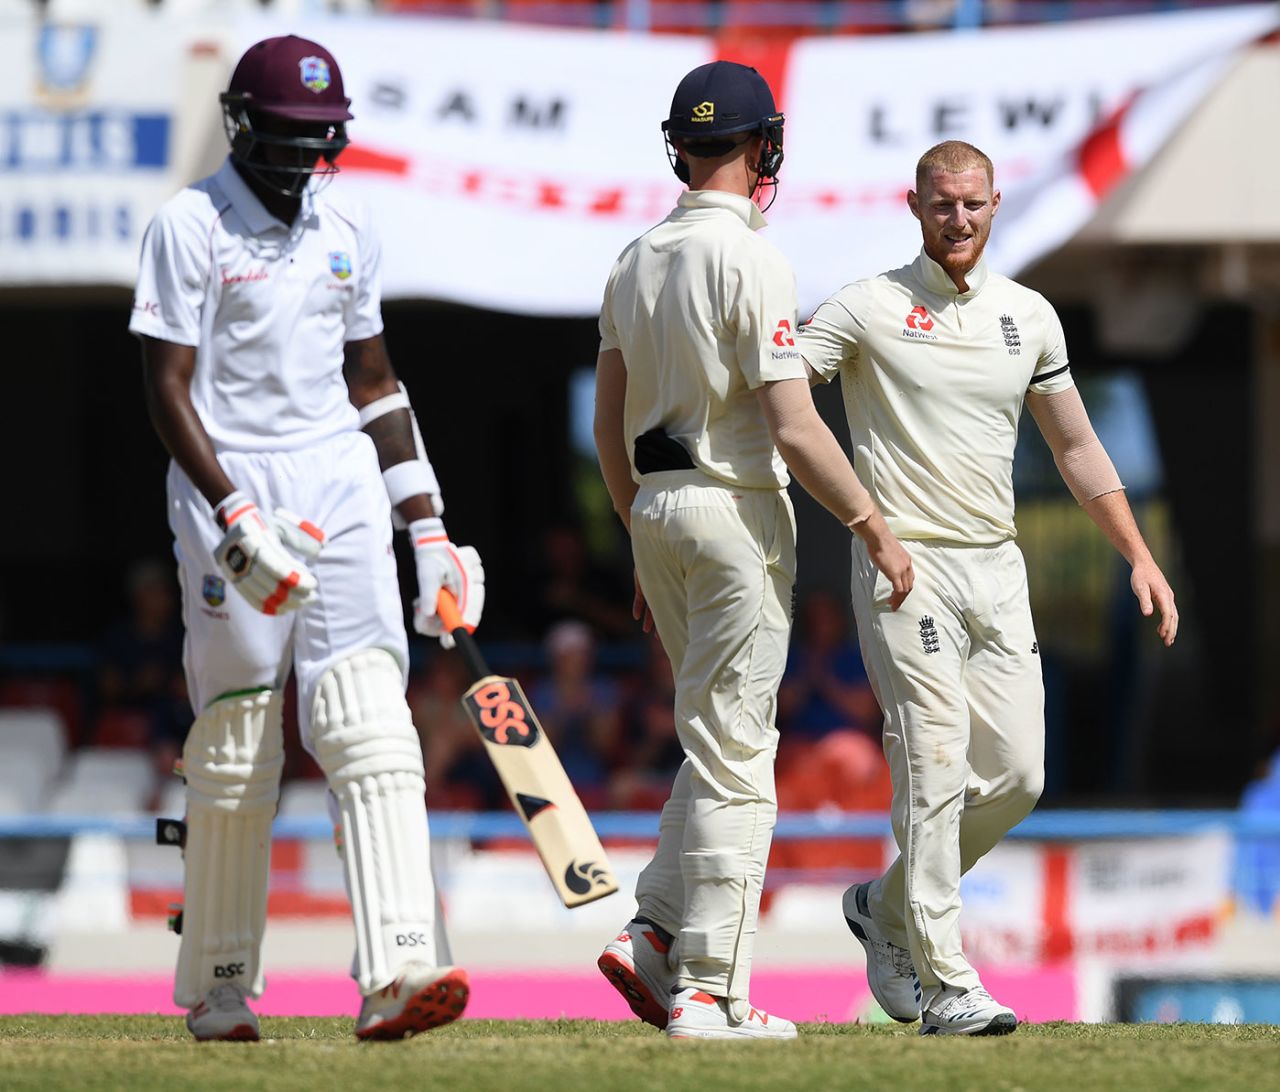 Ben Stokes claimed the scalp of Alzarri Joseph, West Indies v England, 2nd Test, 3rd day, Antigua, February 2, 2019